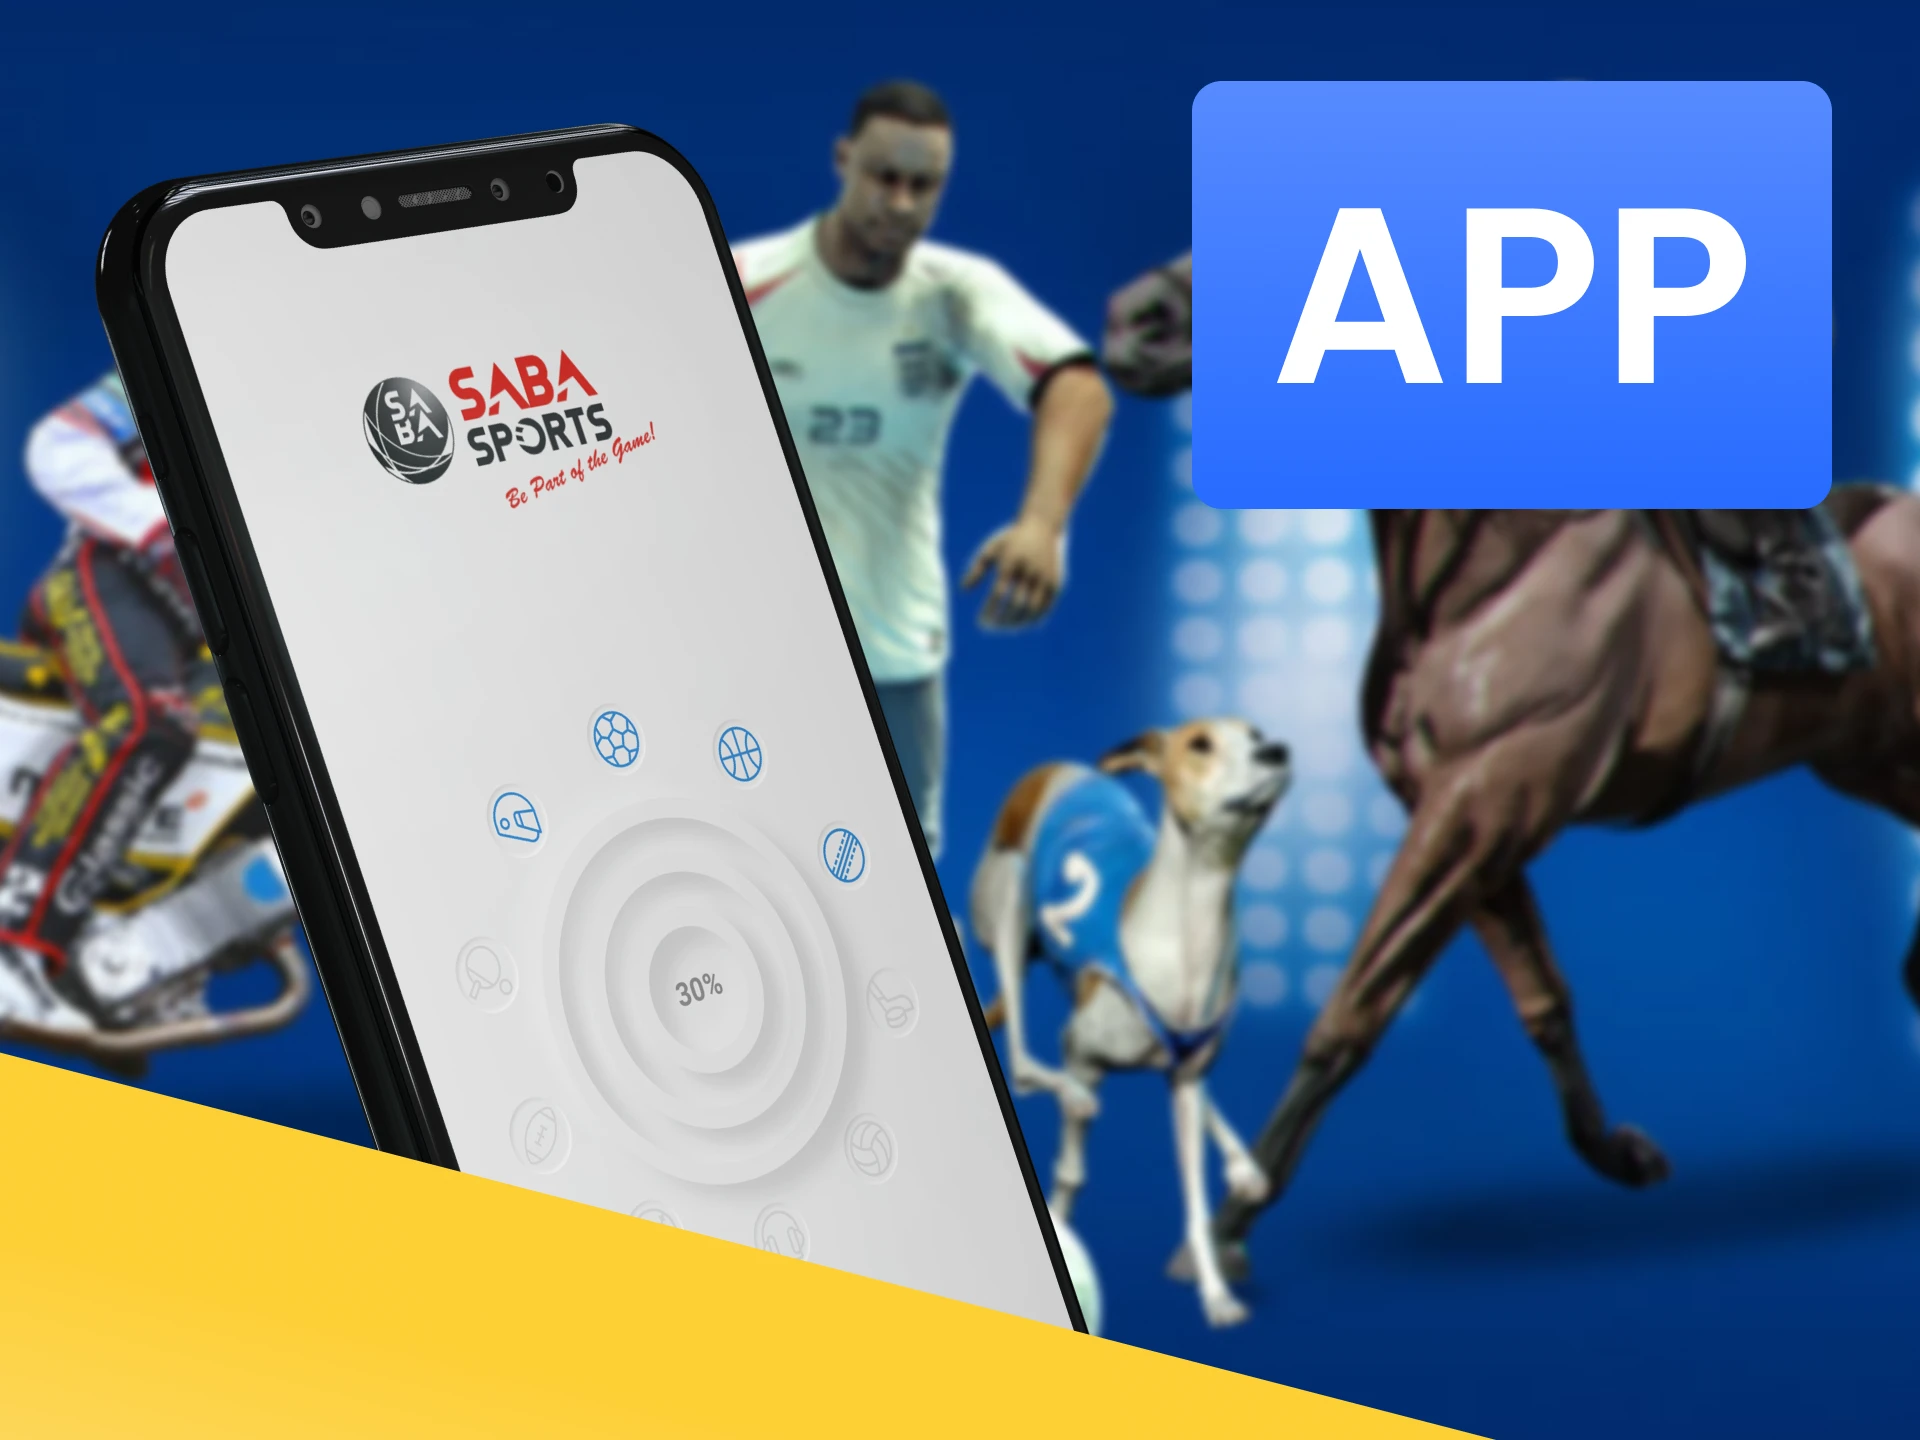 You can bet on virtual sports through the Mostplay app.